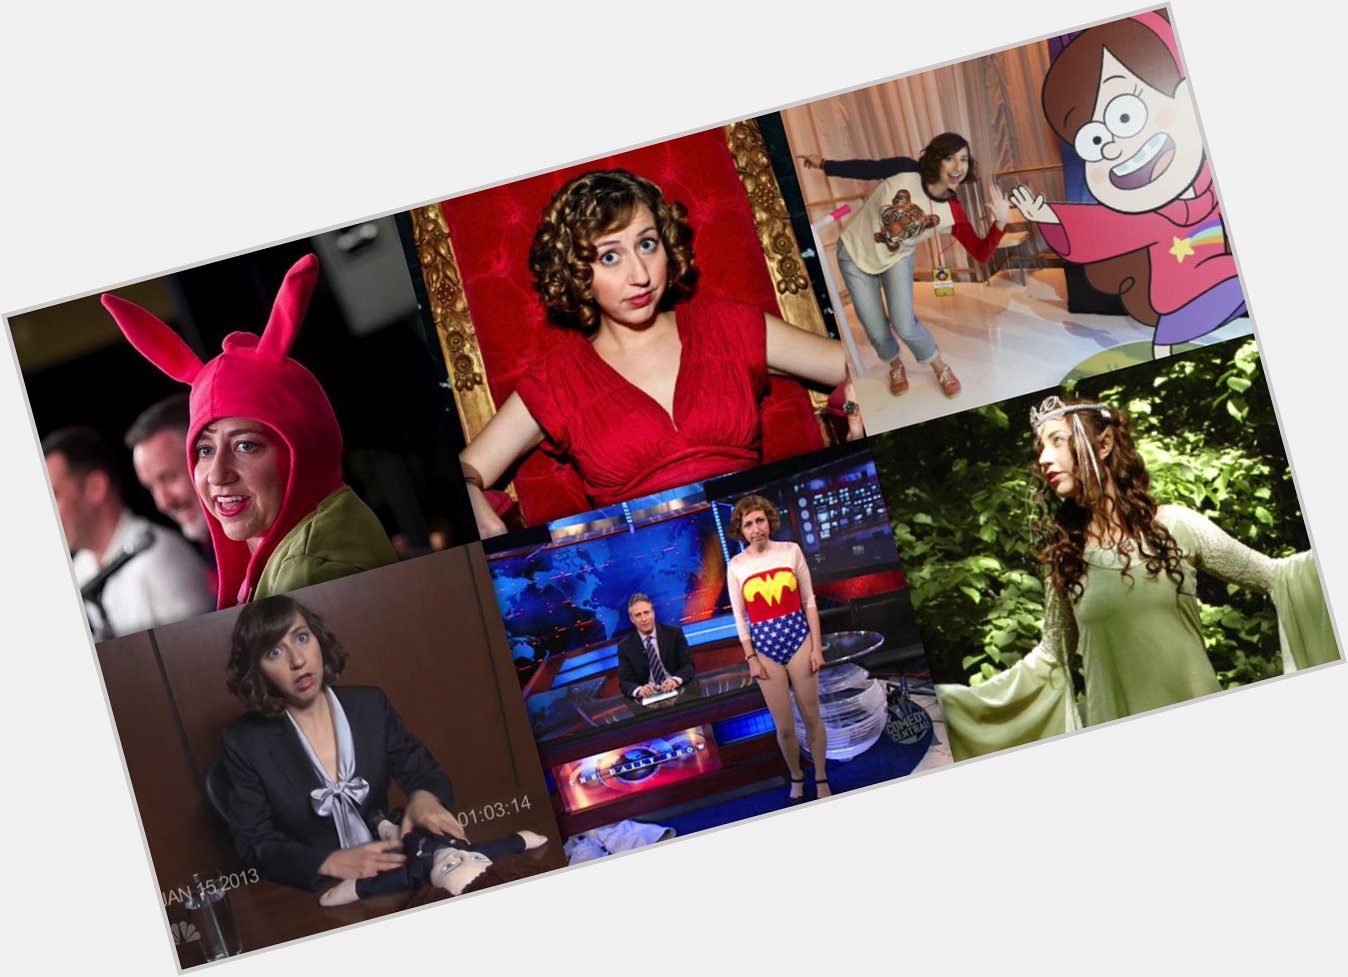 Happy 40th Birthday Kristen Schaal! No one knows who the real me is, so I can be a hundred different kinds of me. 